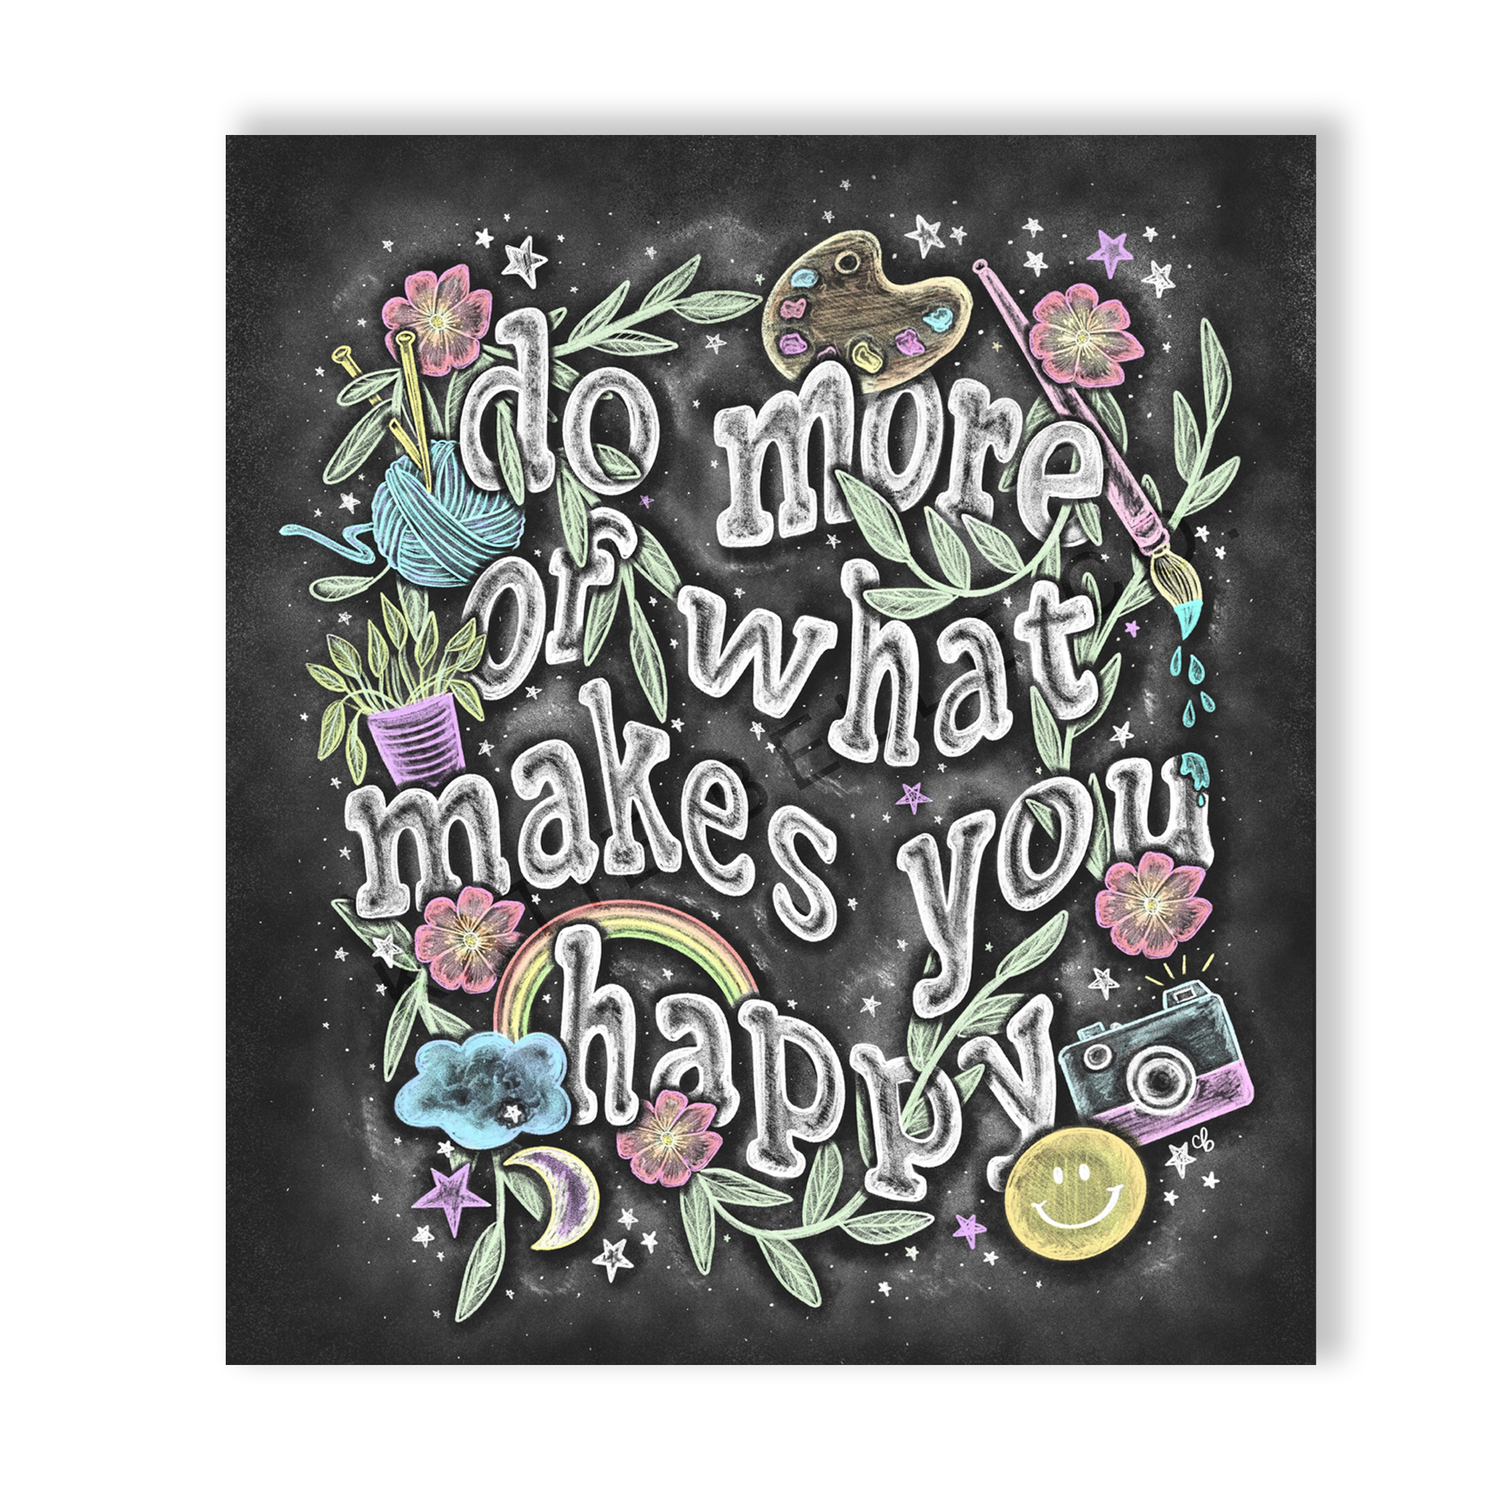 Do more of what makes you happy. Motivational Art. Positive Quote. Chalkboard Print. Chalk Art. Katie Belle Co. Hobbies. Smiley Face Design. Colorful Artwork. 